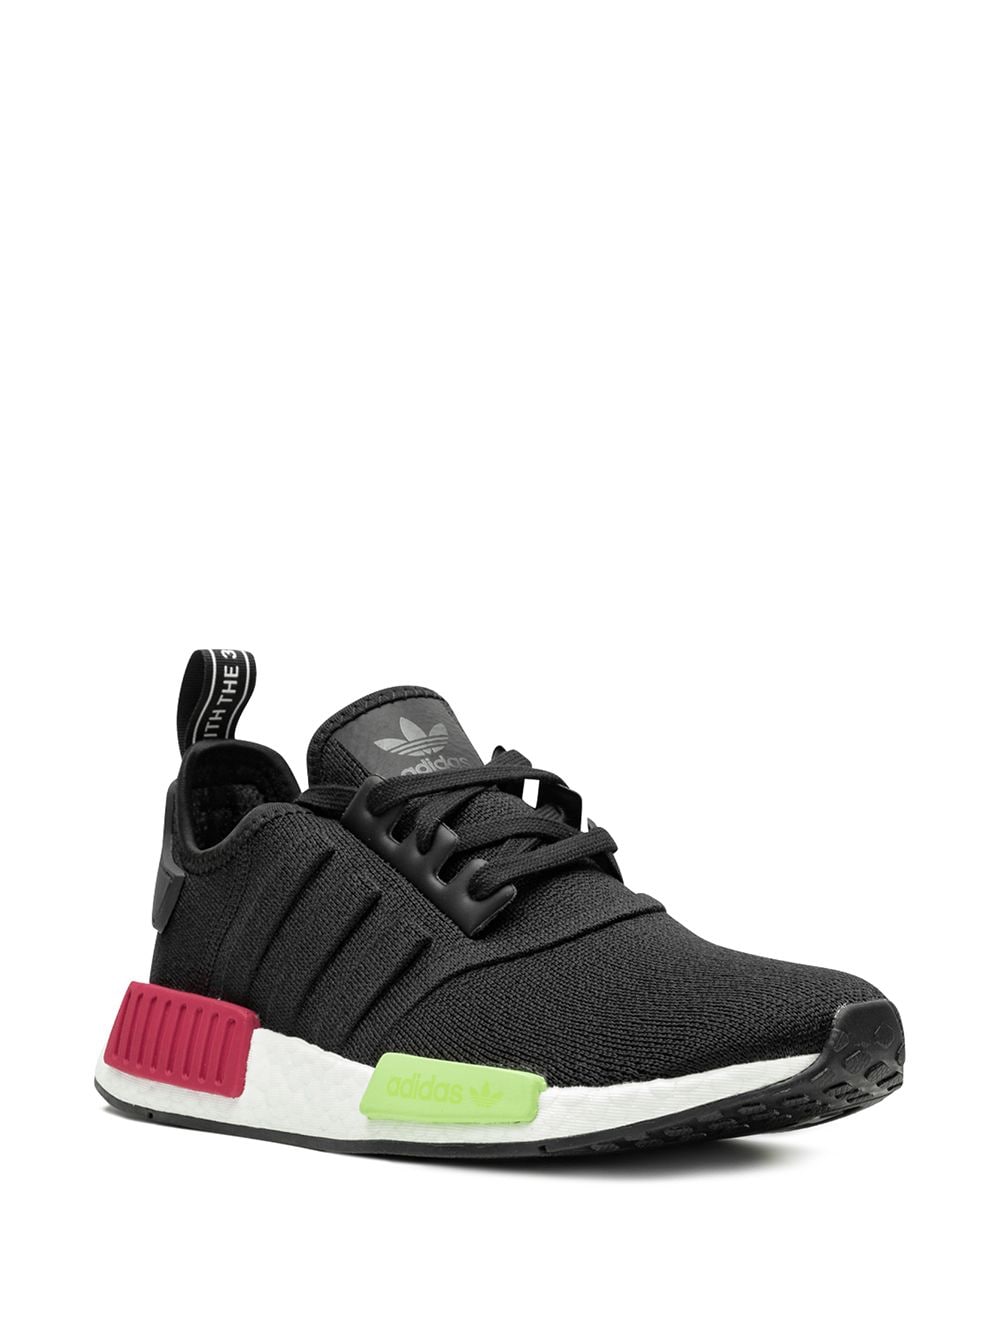 Image 2 of adidas NMD R1 low-top sneakers